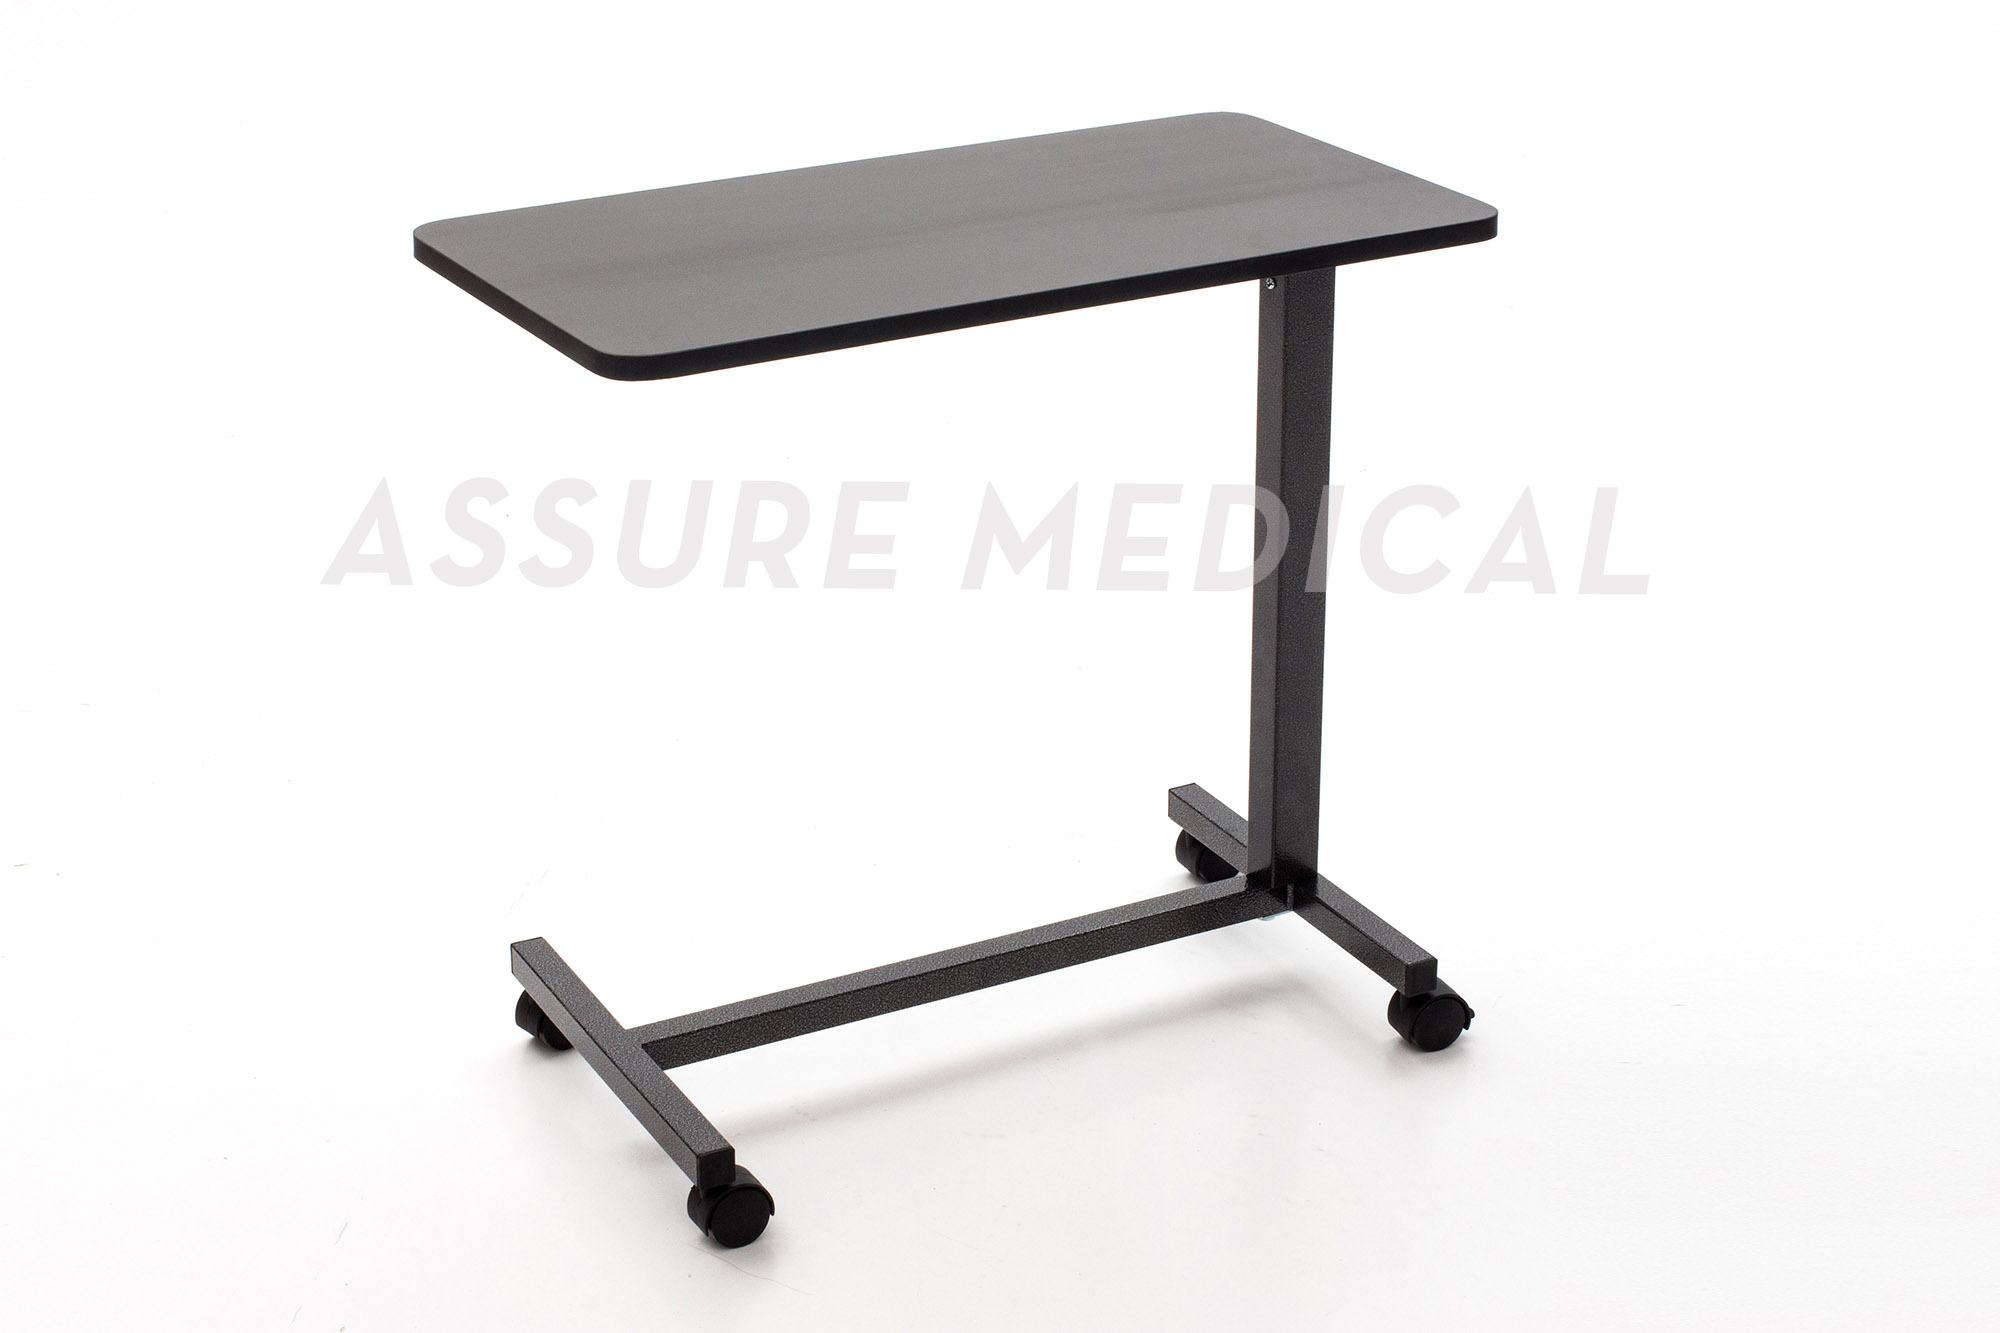 Wooden Adjustable Overbed Table (YJ-6700) Hospital Overbed Table